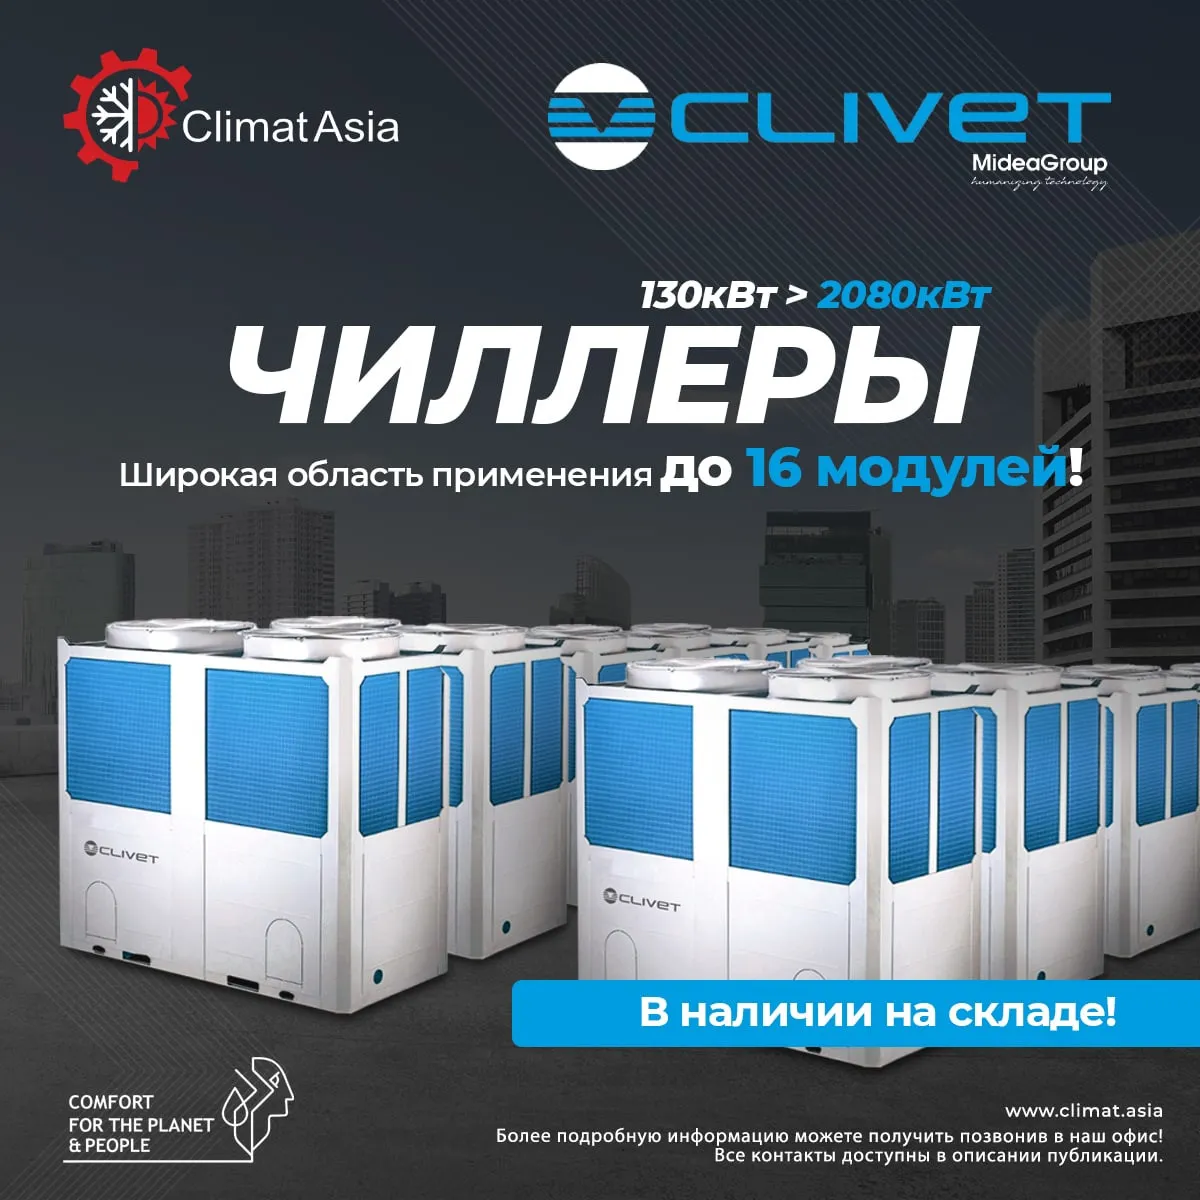 Chiller/chiler 𝐂𝐋𝐈𝐕𝐄𝐓 (A Group Company of Midea) 130кВт#1